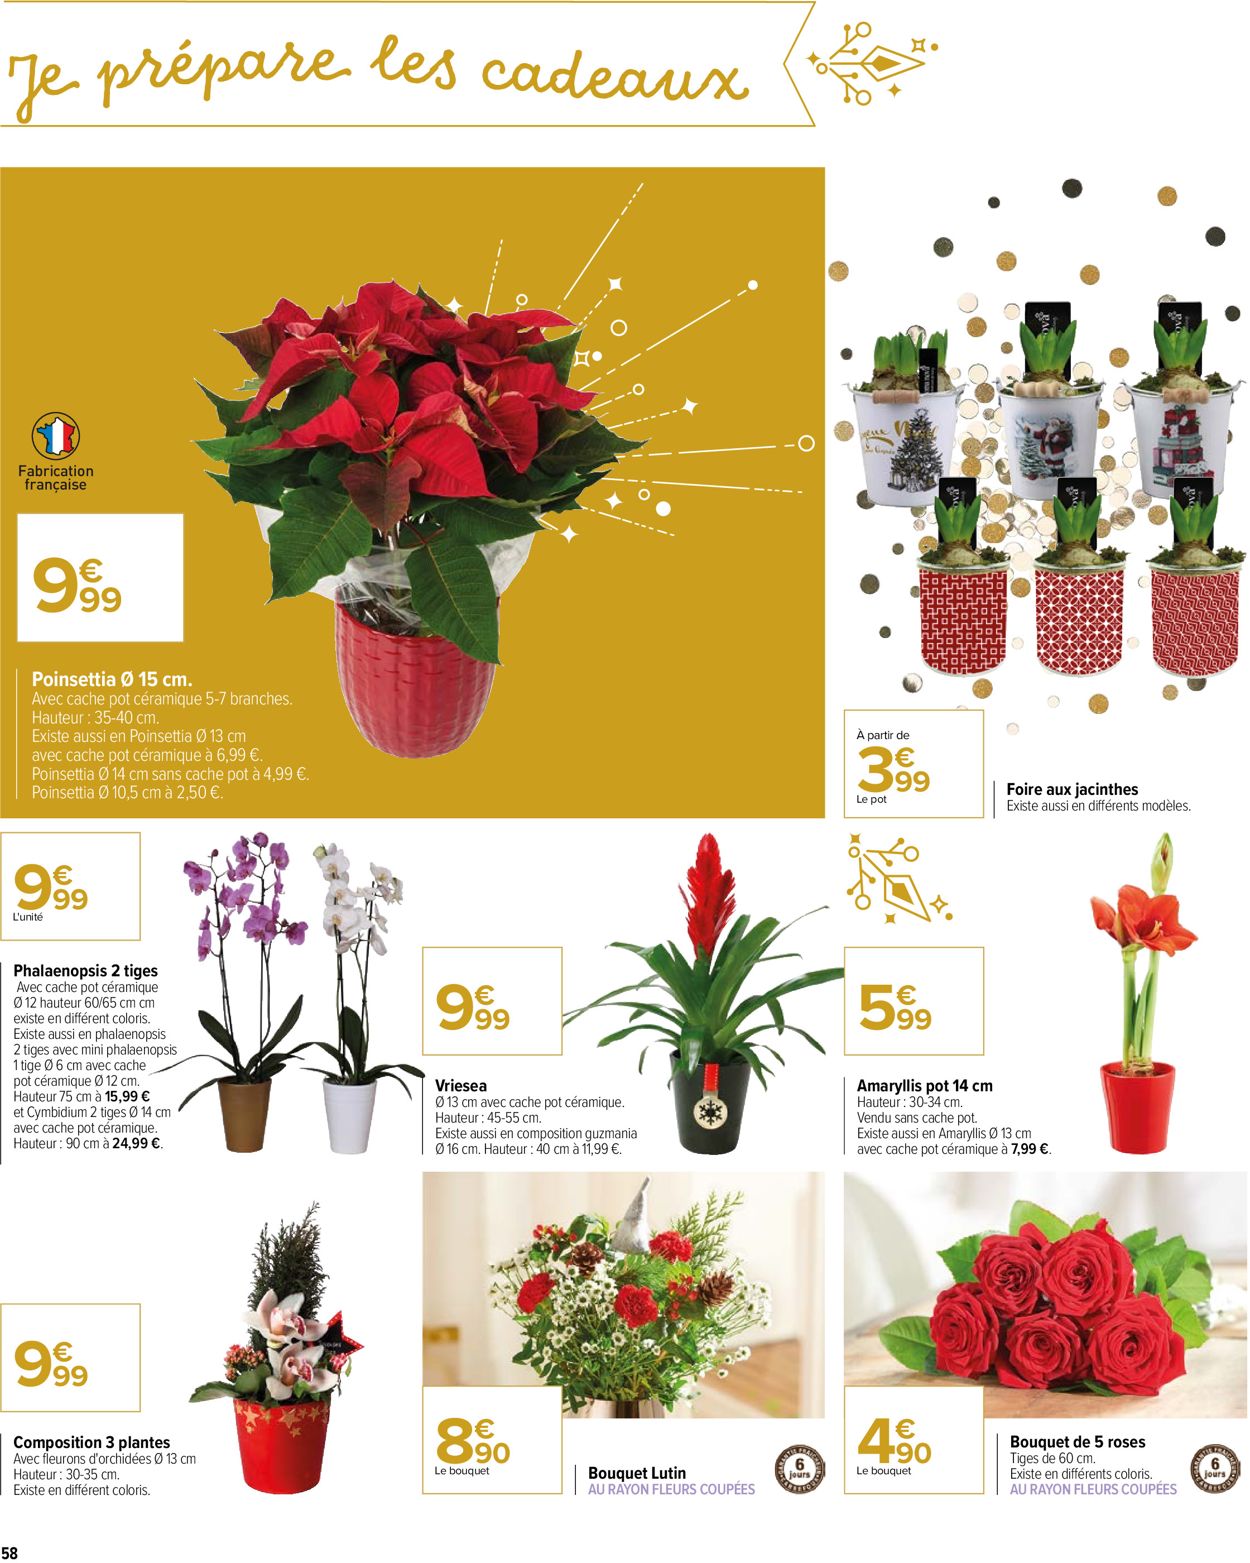 Carrefour Grand Noel 2020 Catalogue - 08.12-20.12.2020 (Page 61)